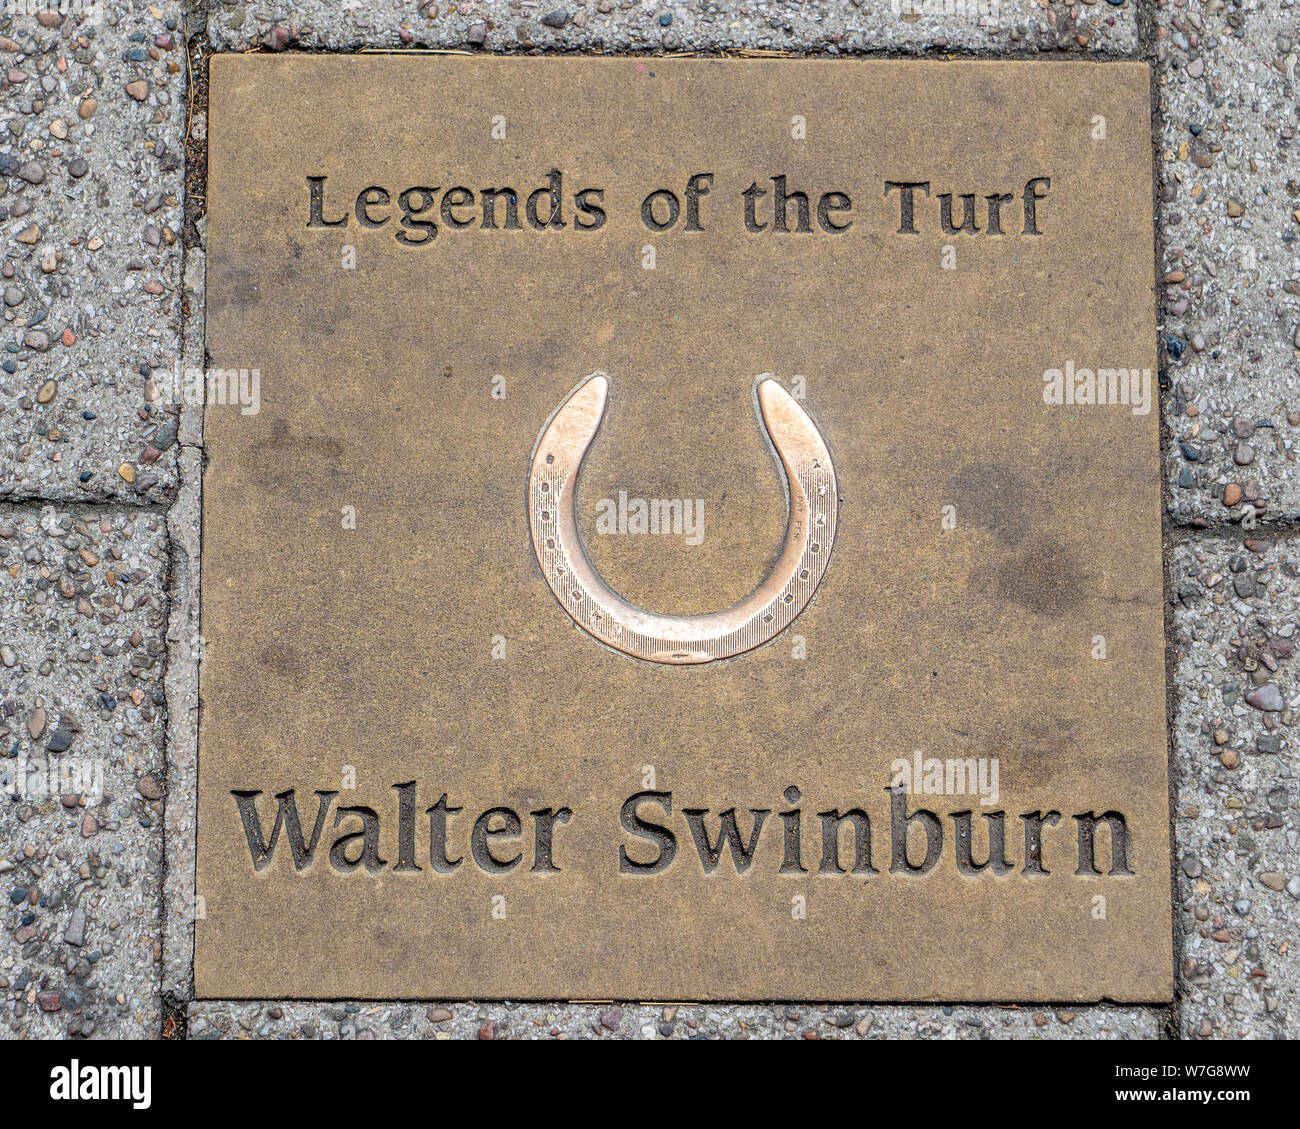 Legends of the Turf Newmarket - Newmarket's 'Walk of Fame' - commemorative paving slabs being laid in Newmarket High Street. Walter Swinburn - jockey Stock Photo